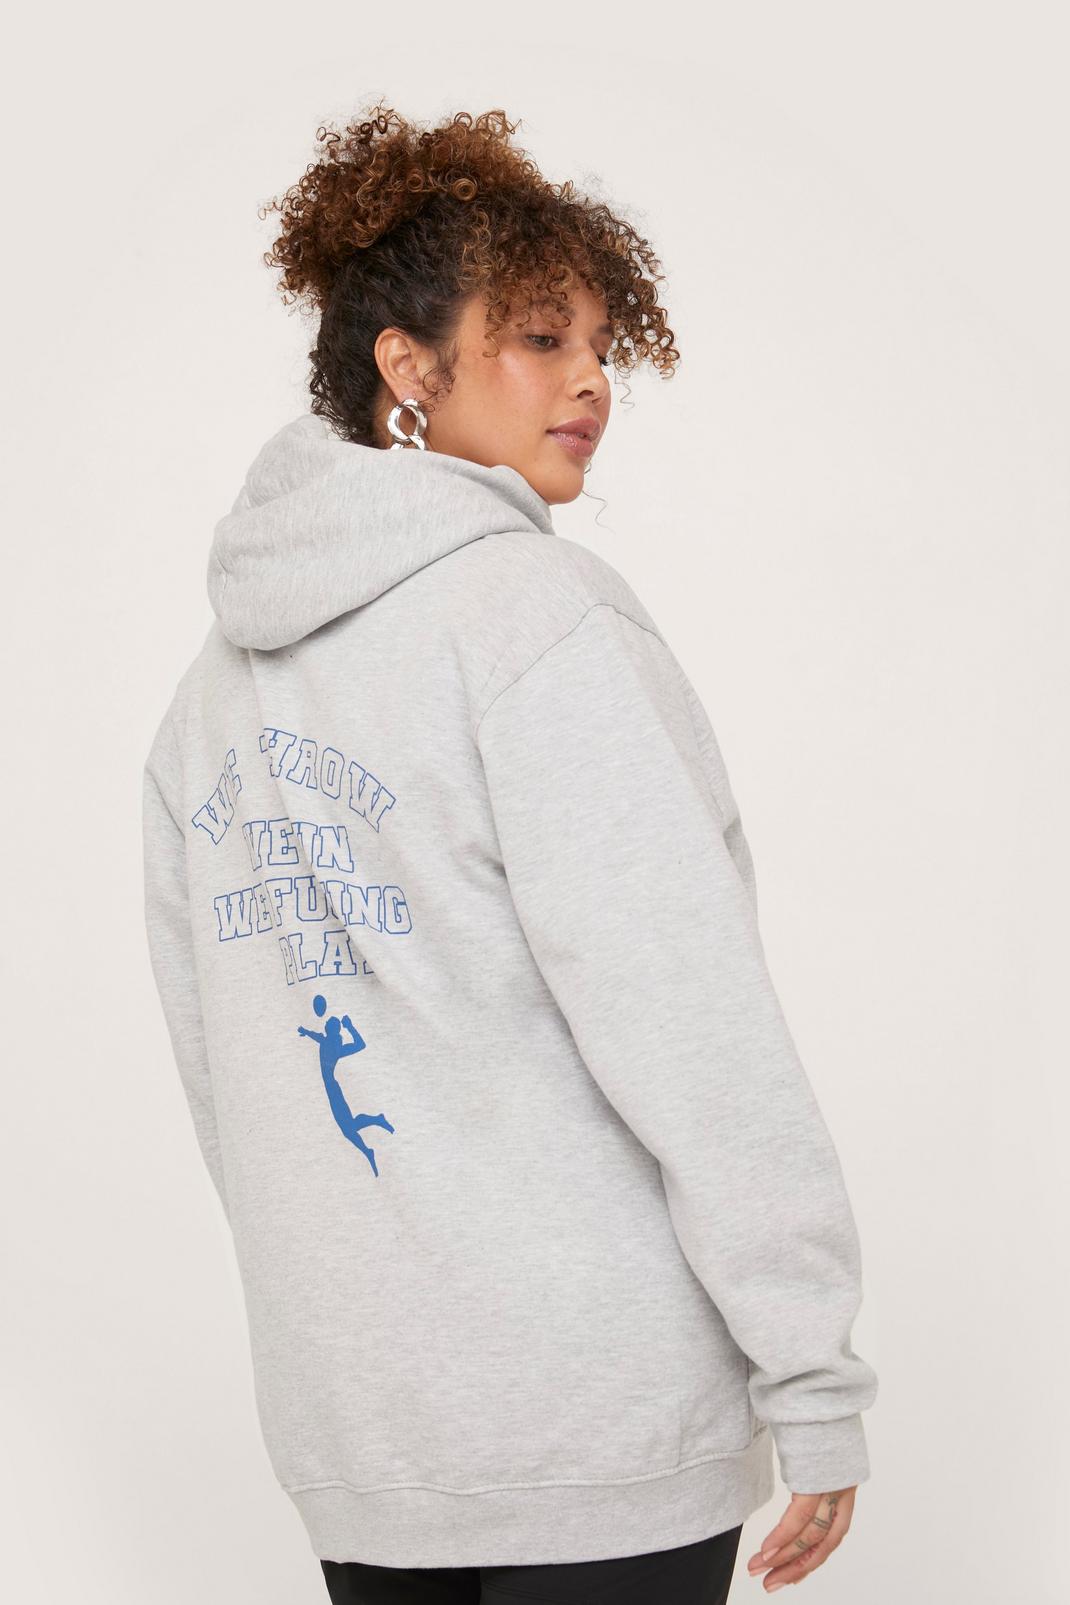 Grande Taille - Sweat oversize à impressions We Throw We play, Grey marl image number 1